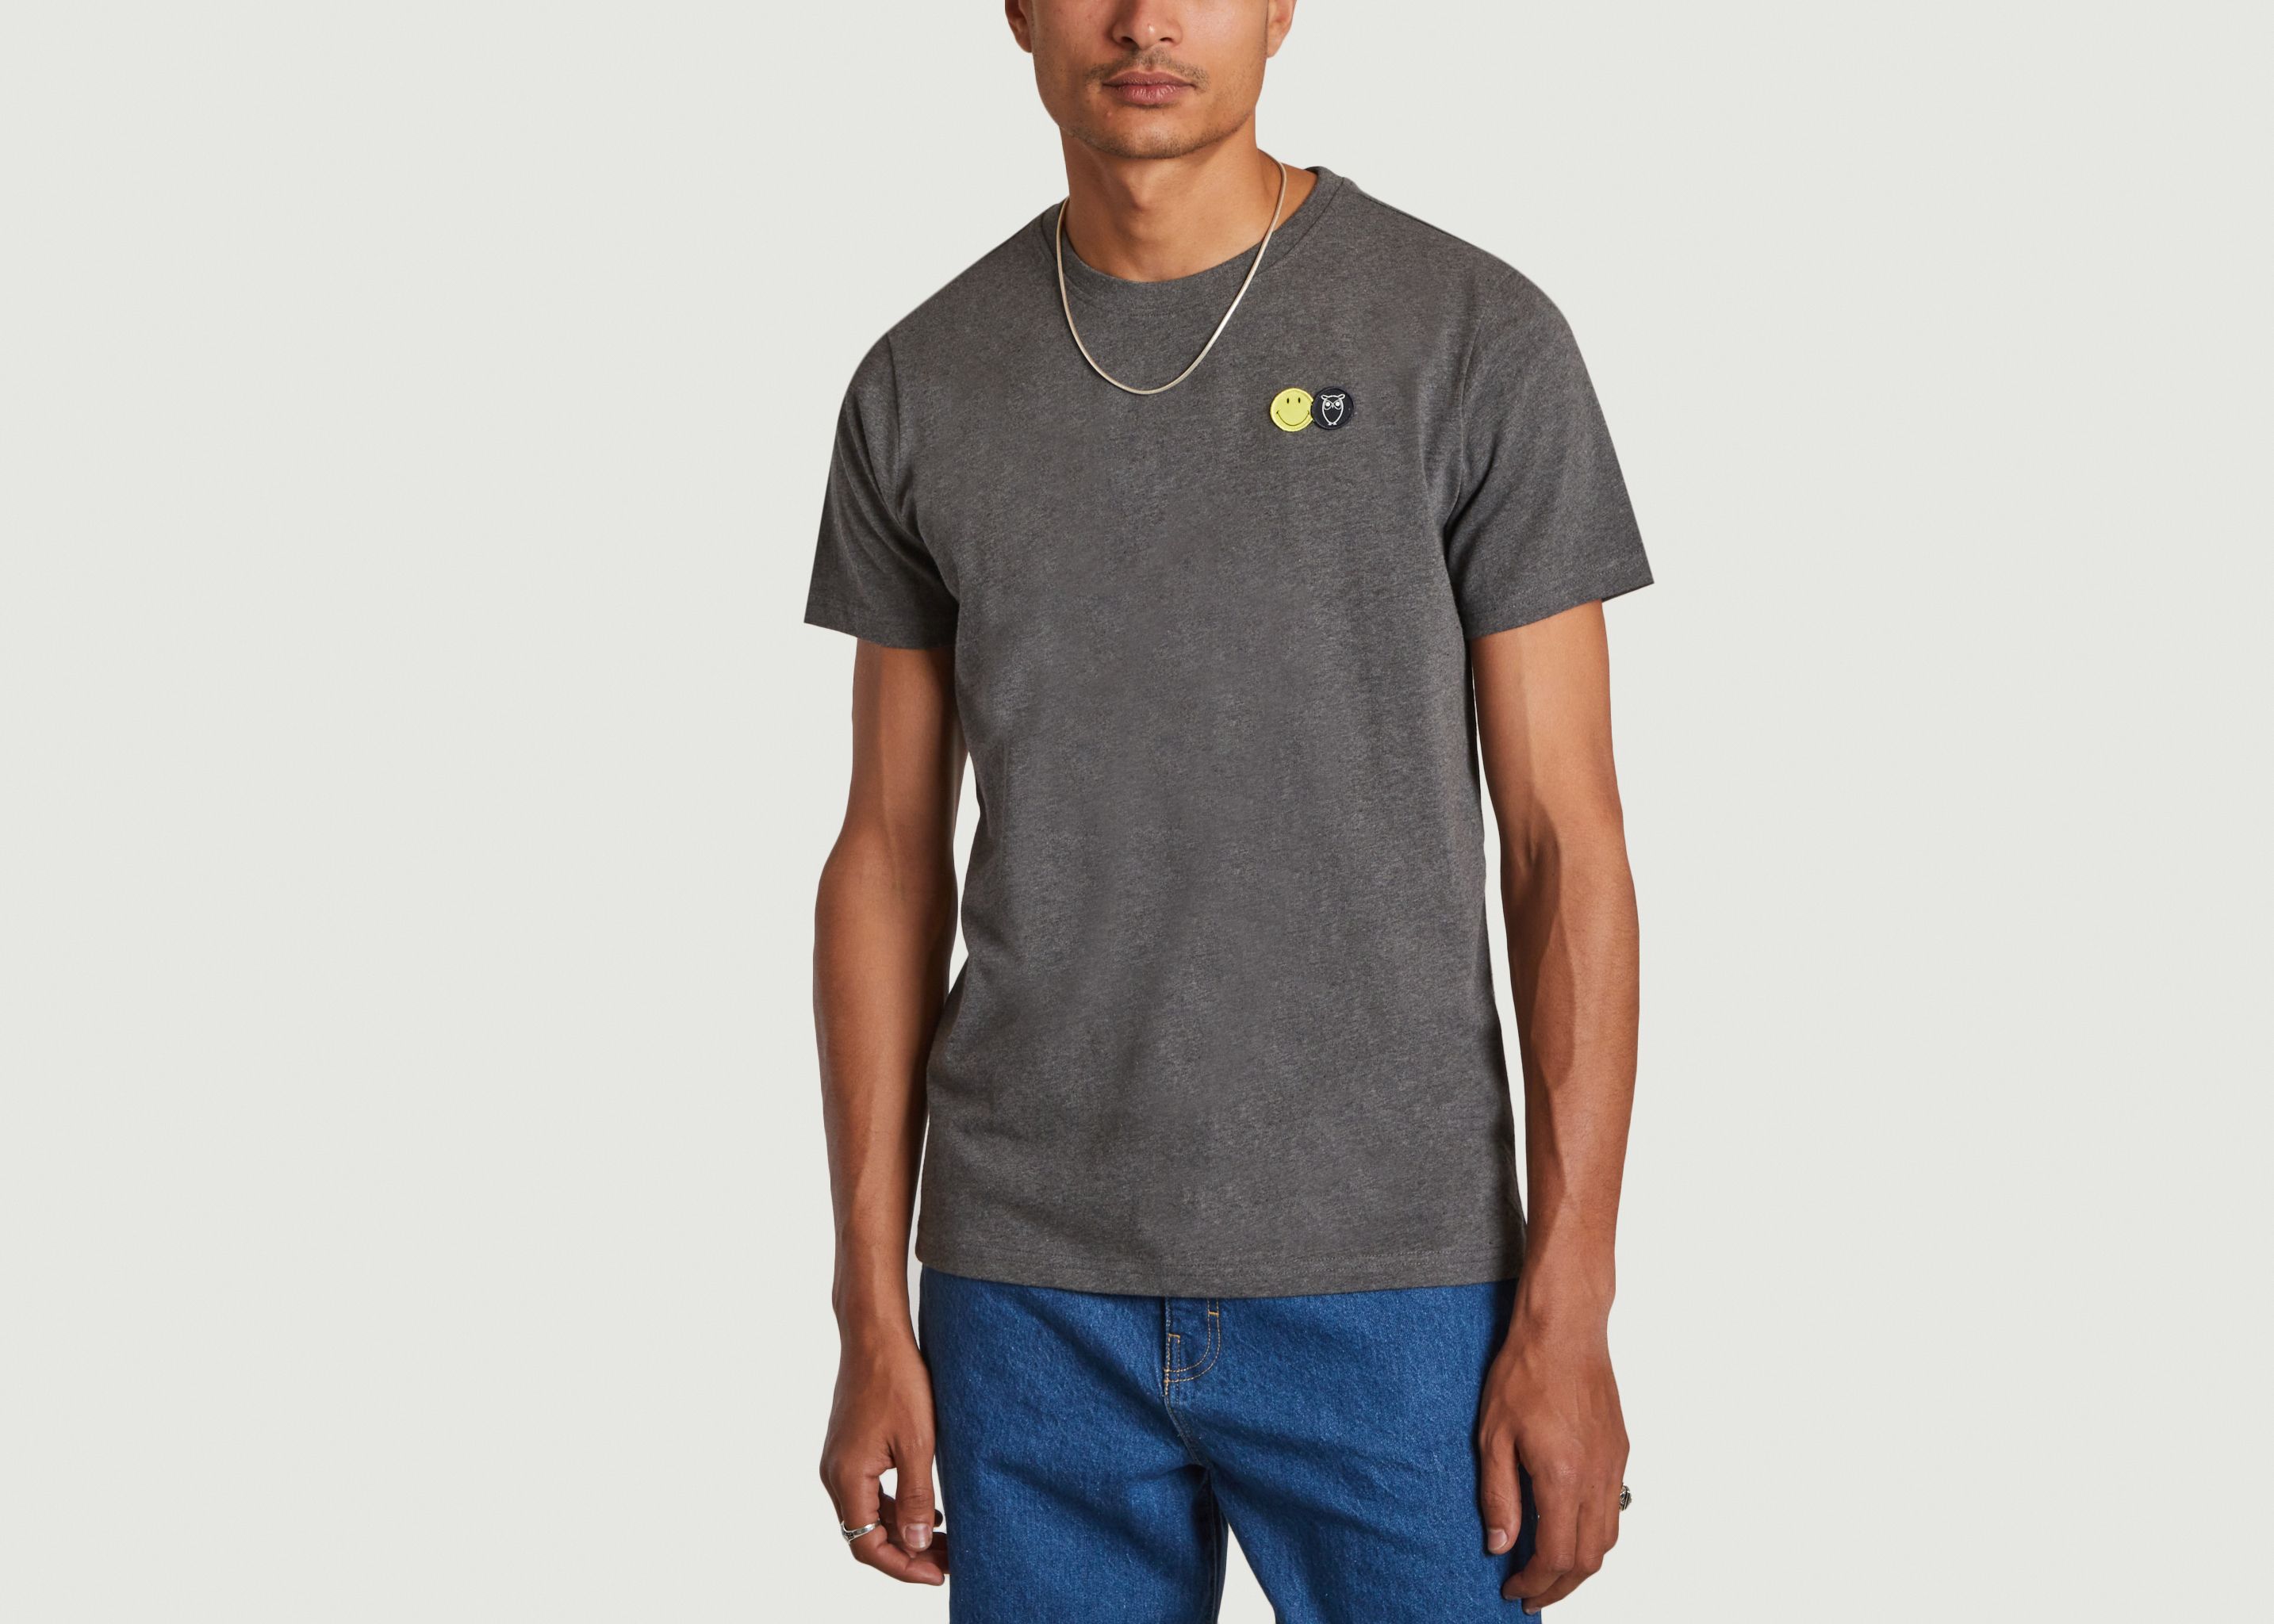 Smiley Embroidery T-shirt - KCA